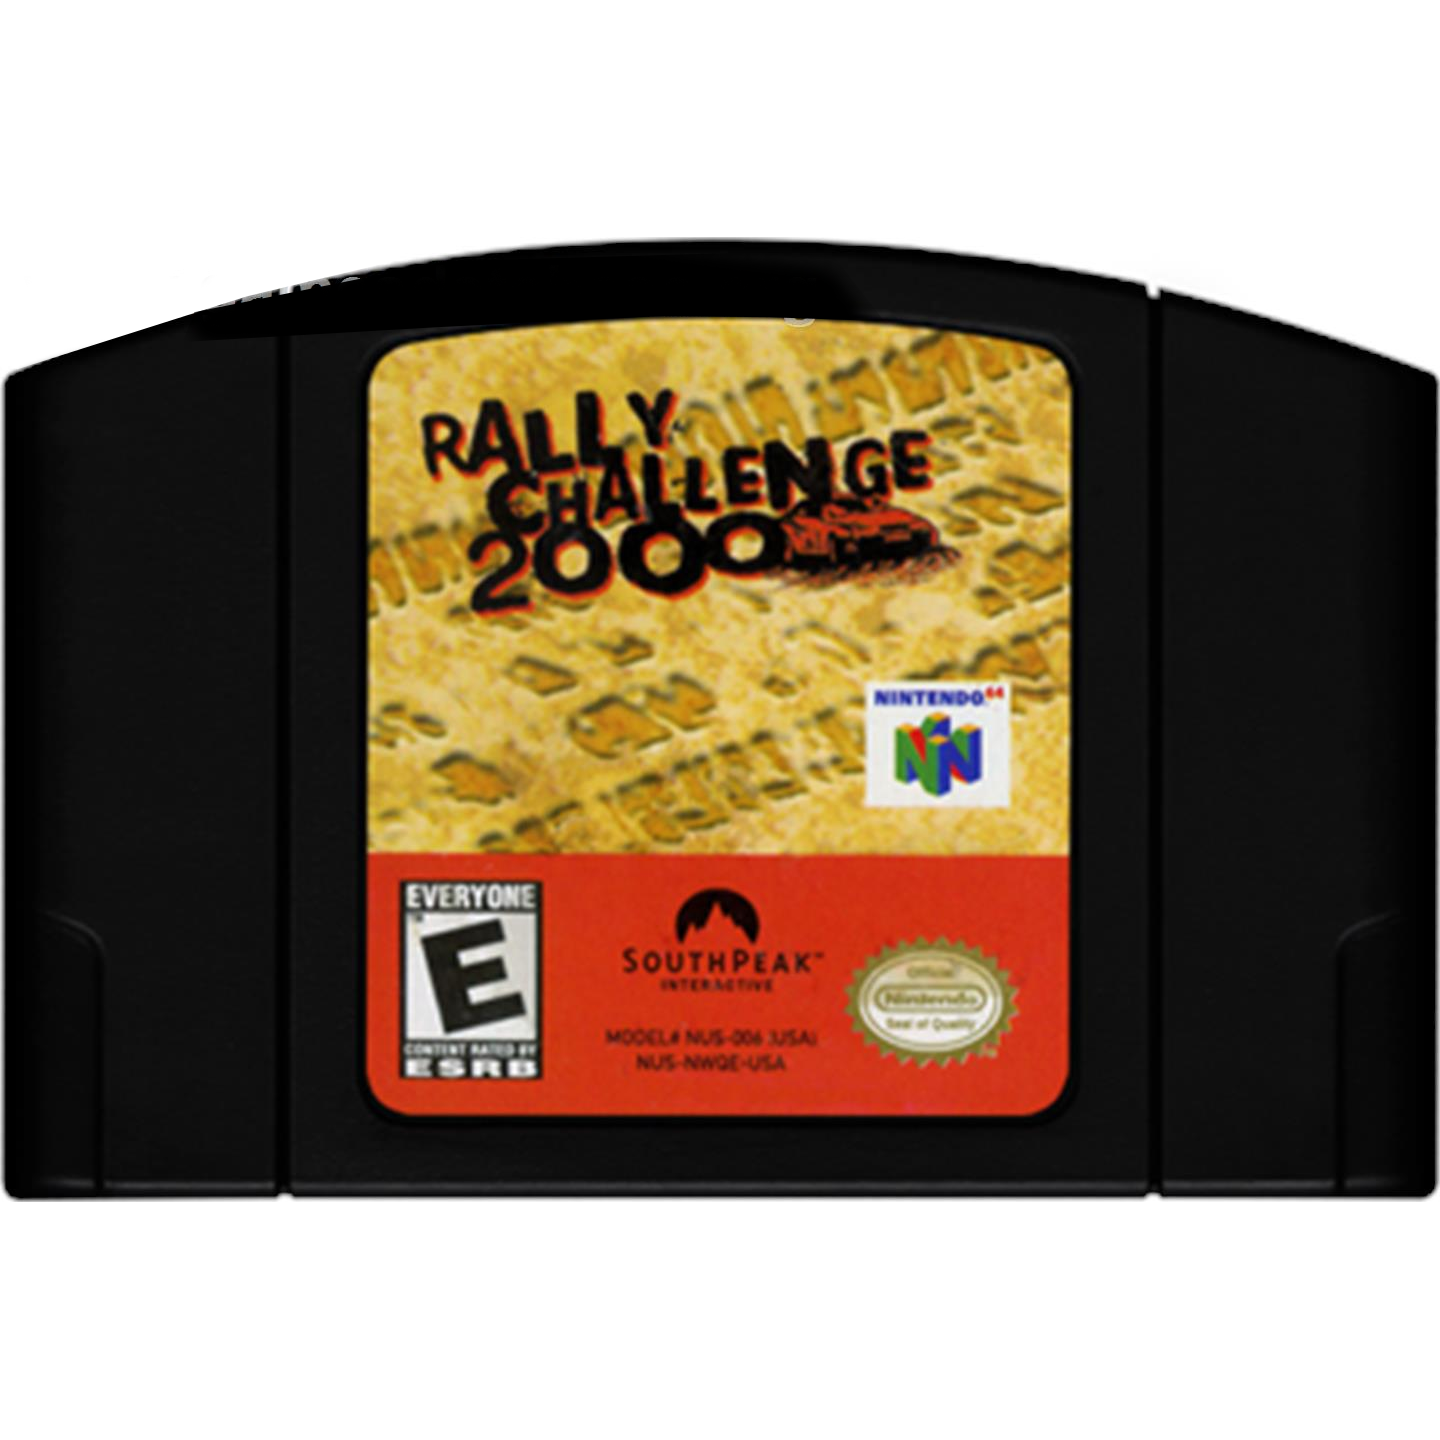 N64 - Rally Challenge 2000 (Cartridge Only)